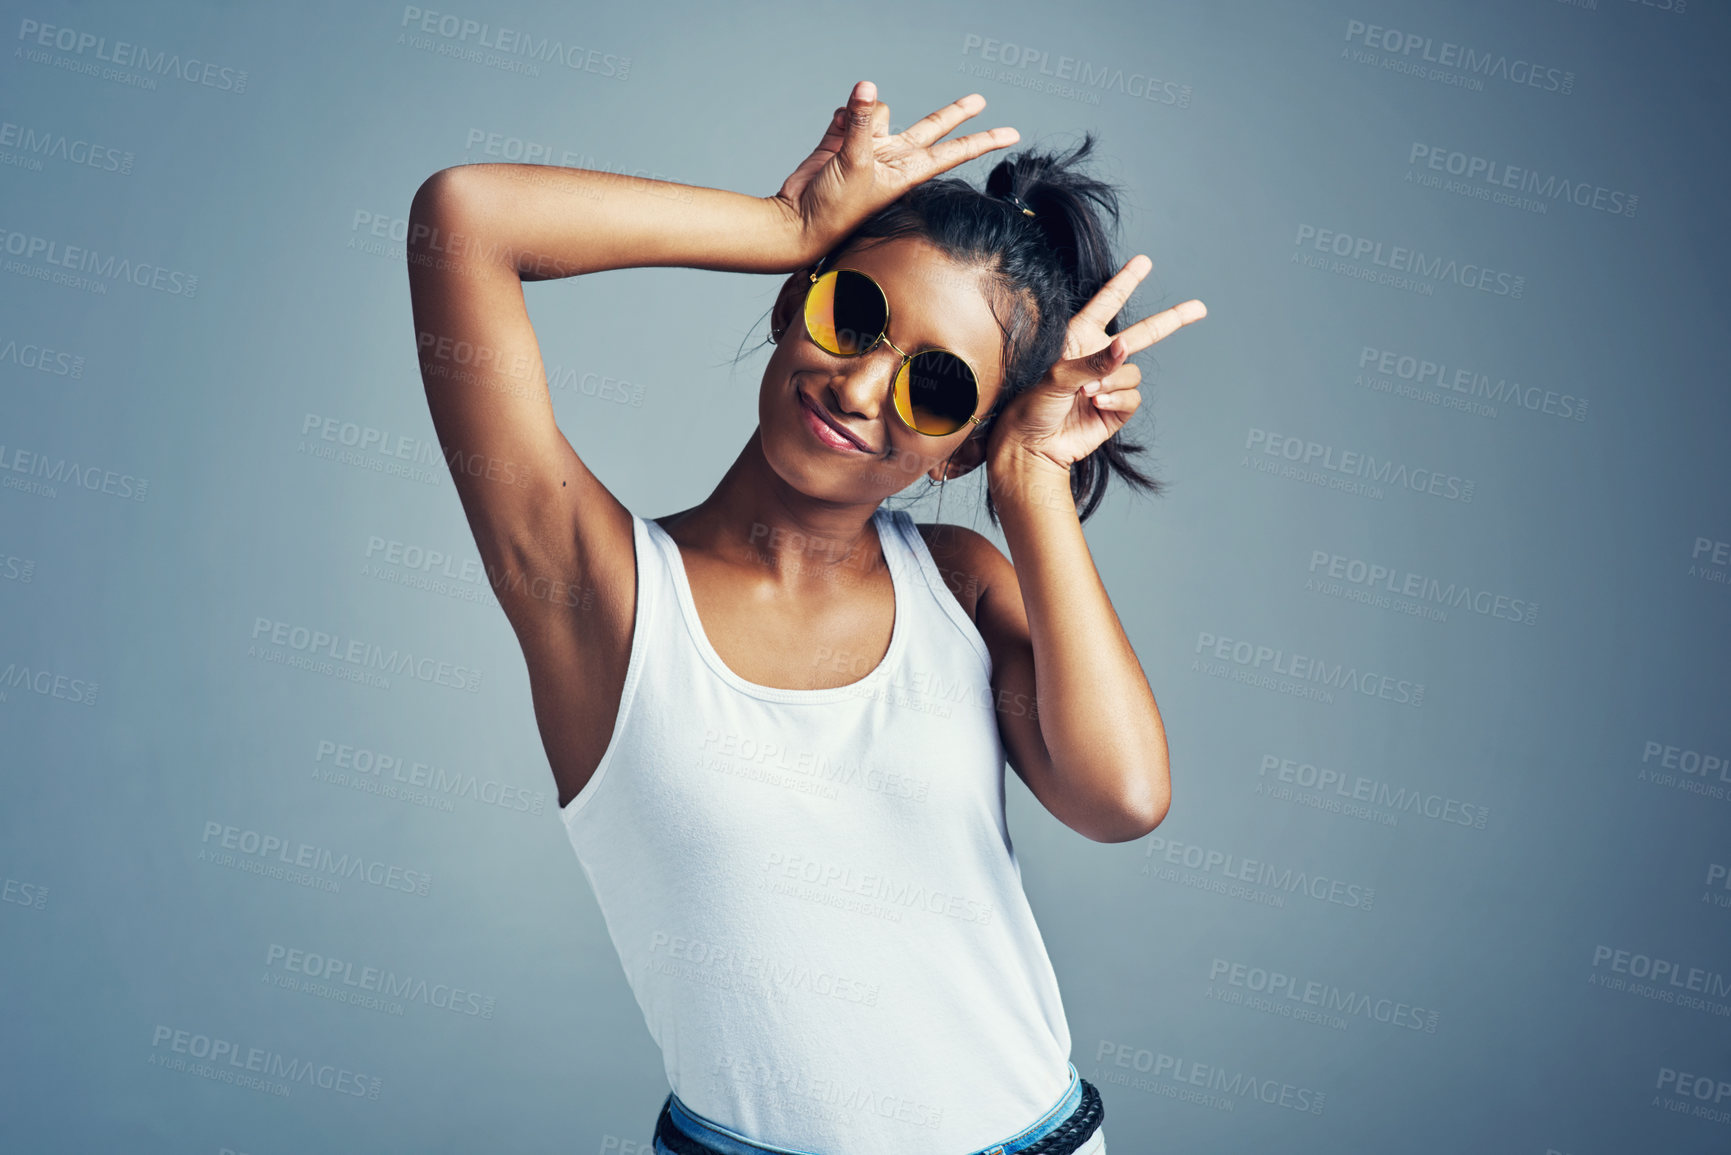 Buy stock photo Studio portrait of a beautiful young woman gesturing with bunny ears against a grey background